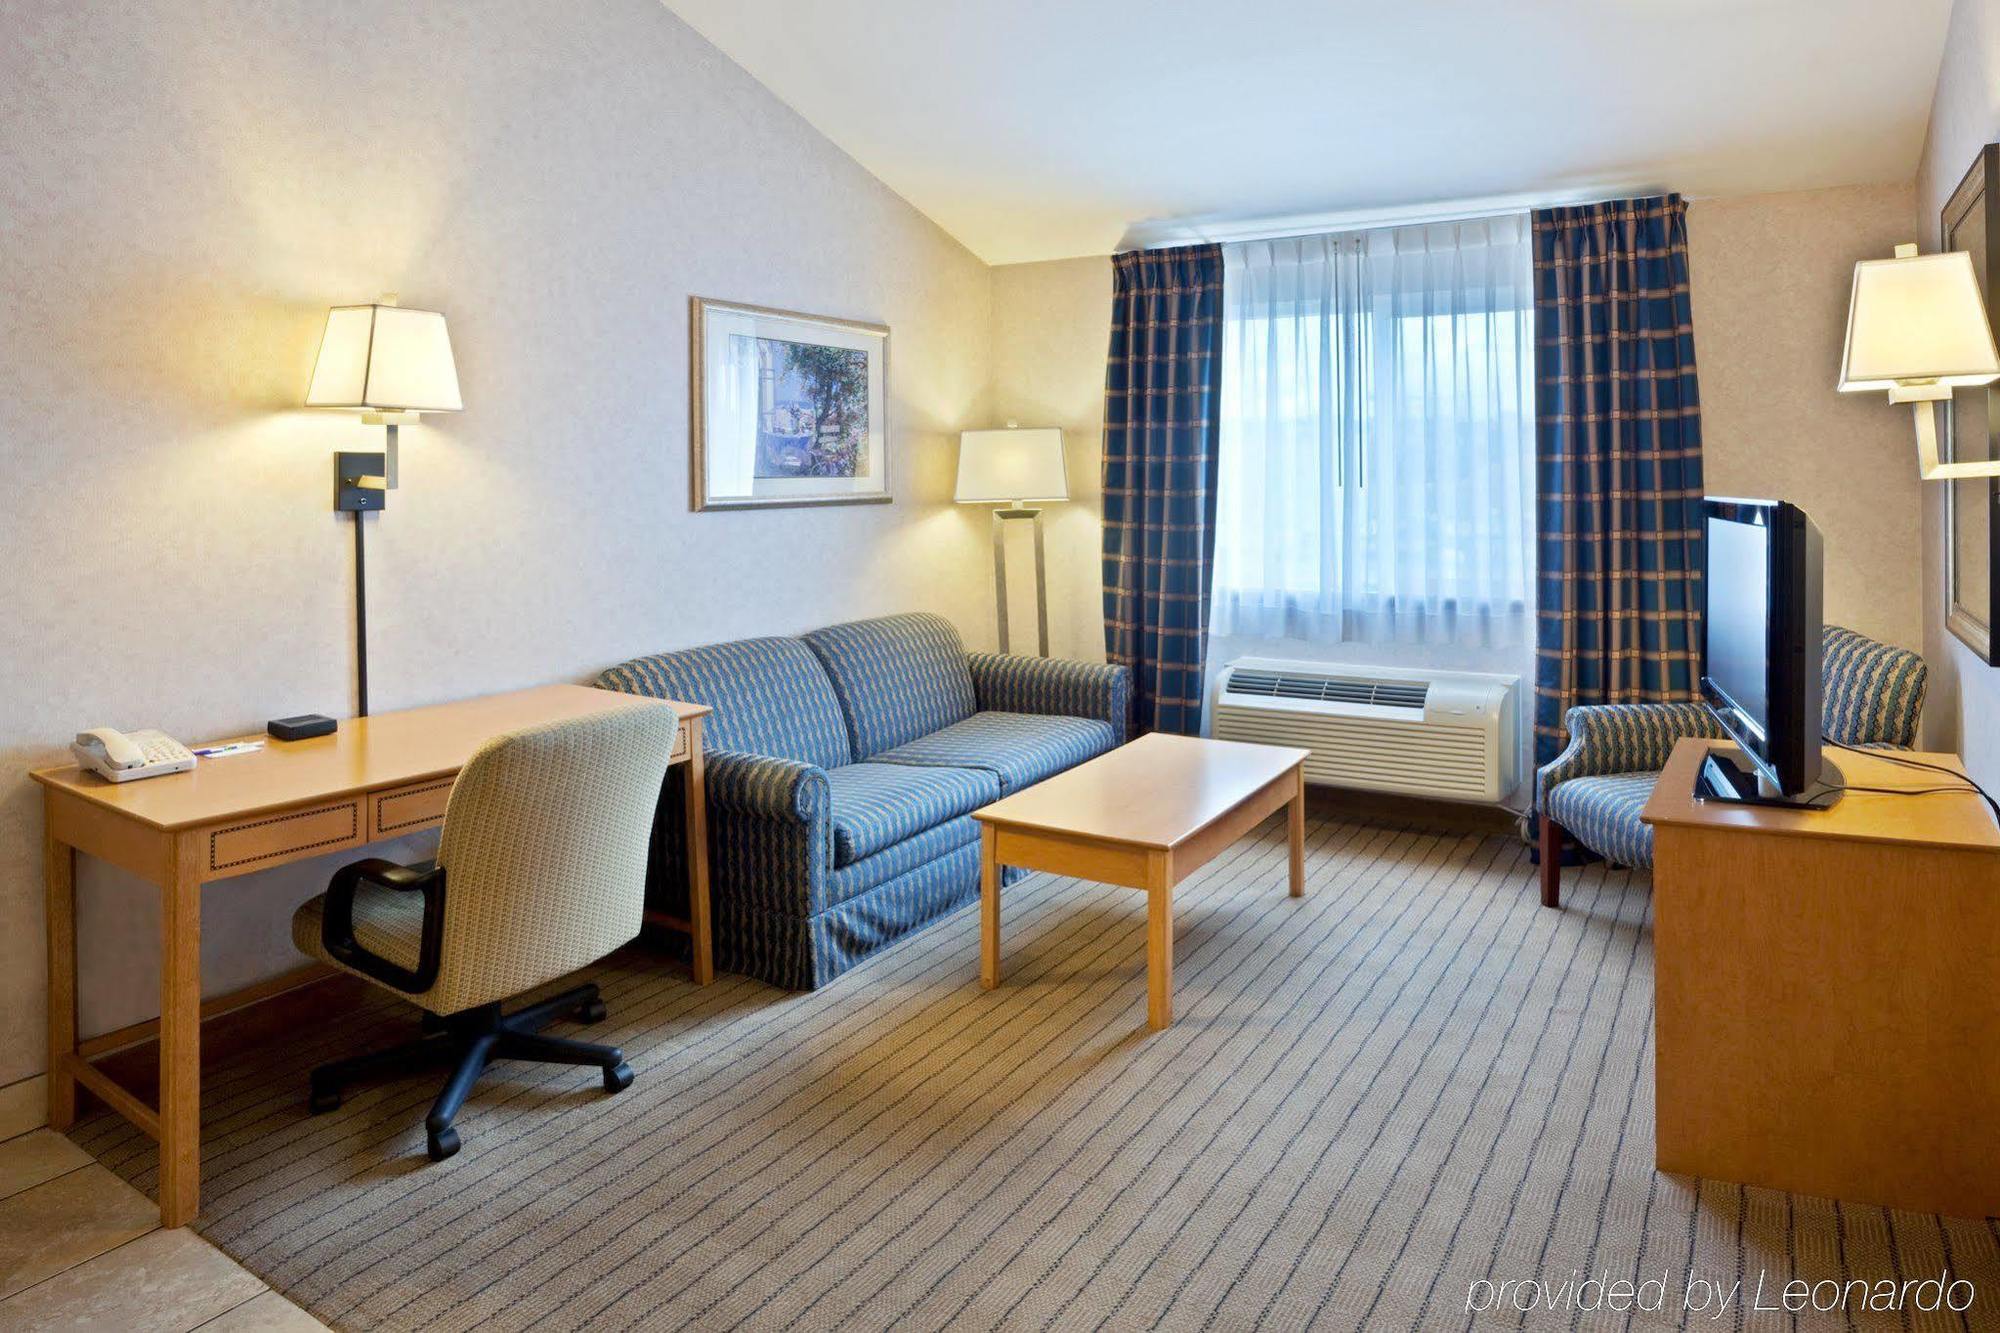 Holiday Inn Express & Suites Seattle - City Center 外观 照片